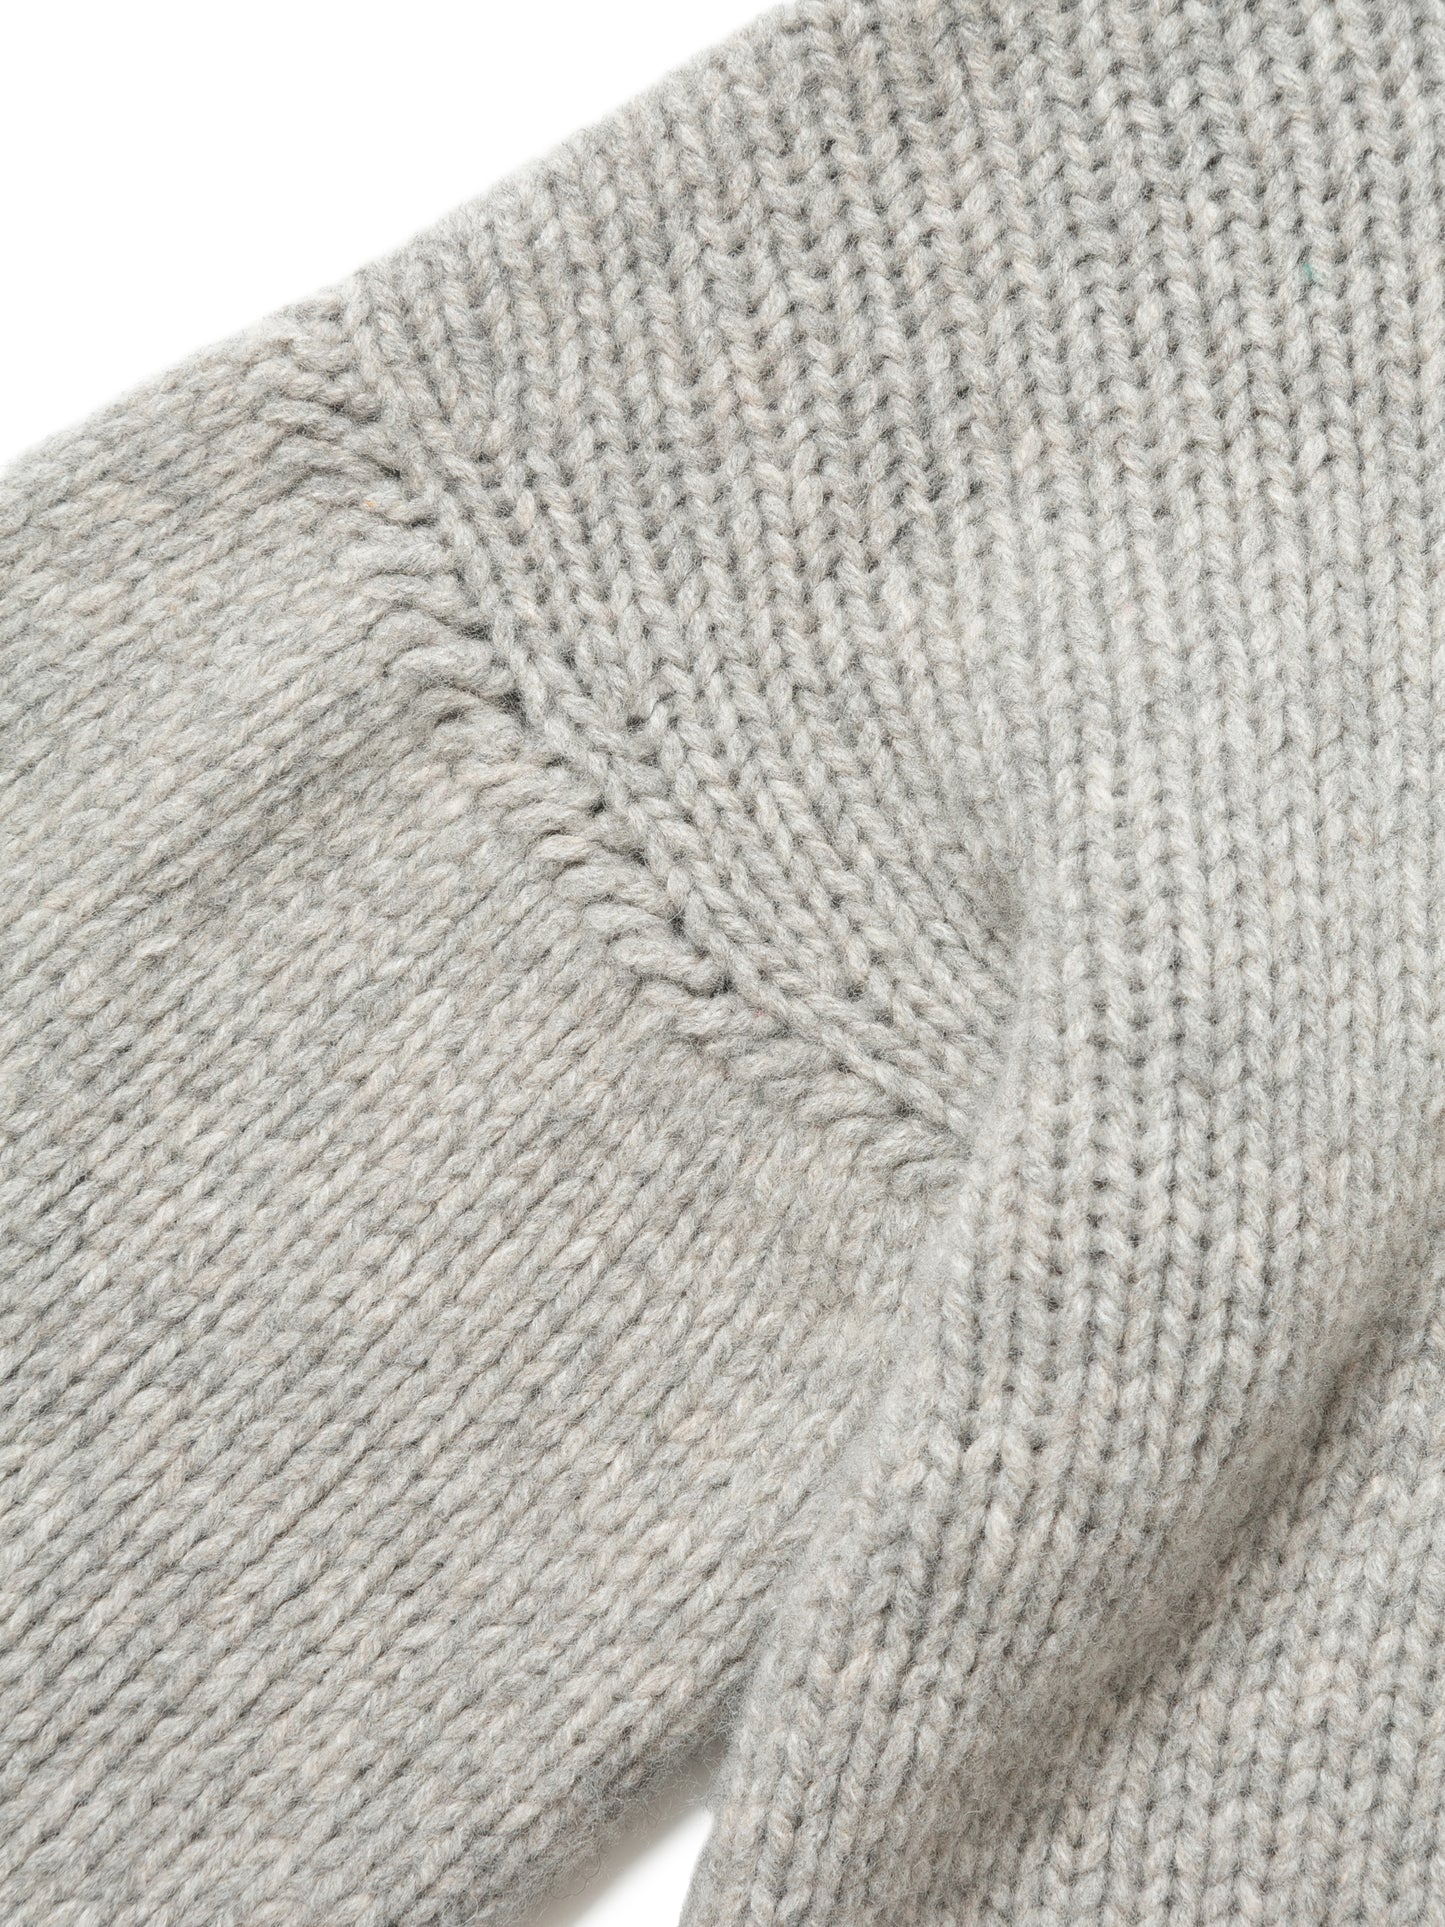 NOMADS SWEATER  HAND MADE WOOL KNIT AM-K0112 Gray